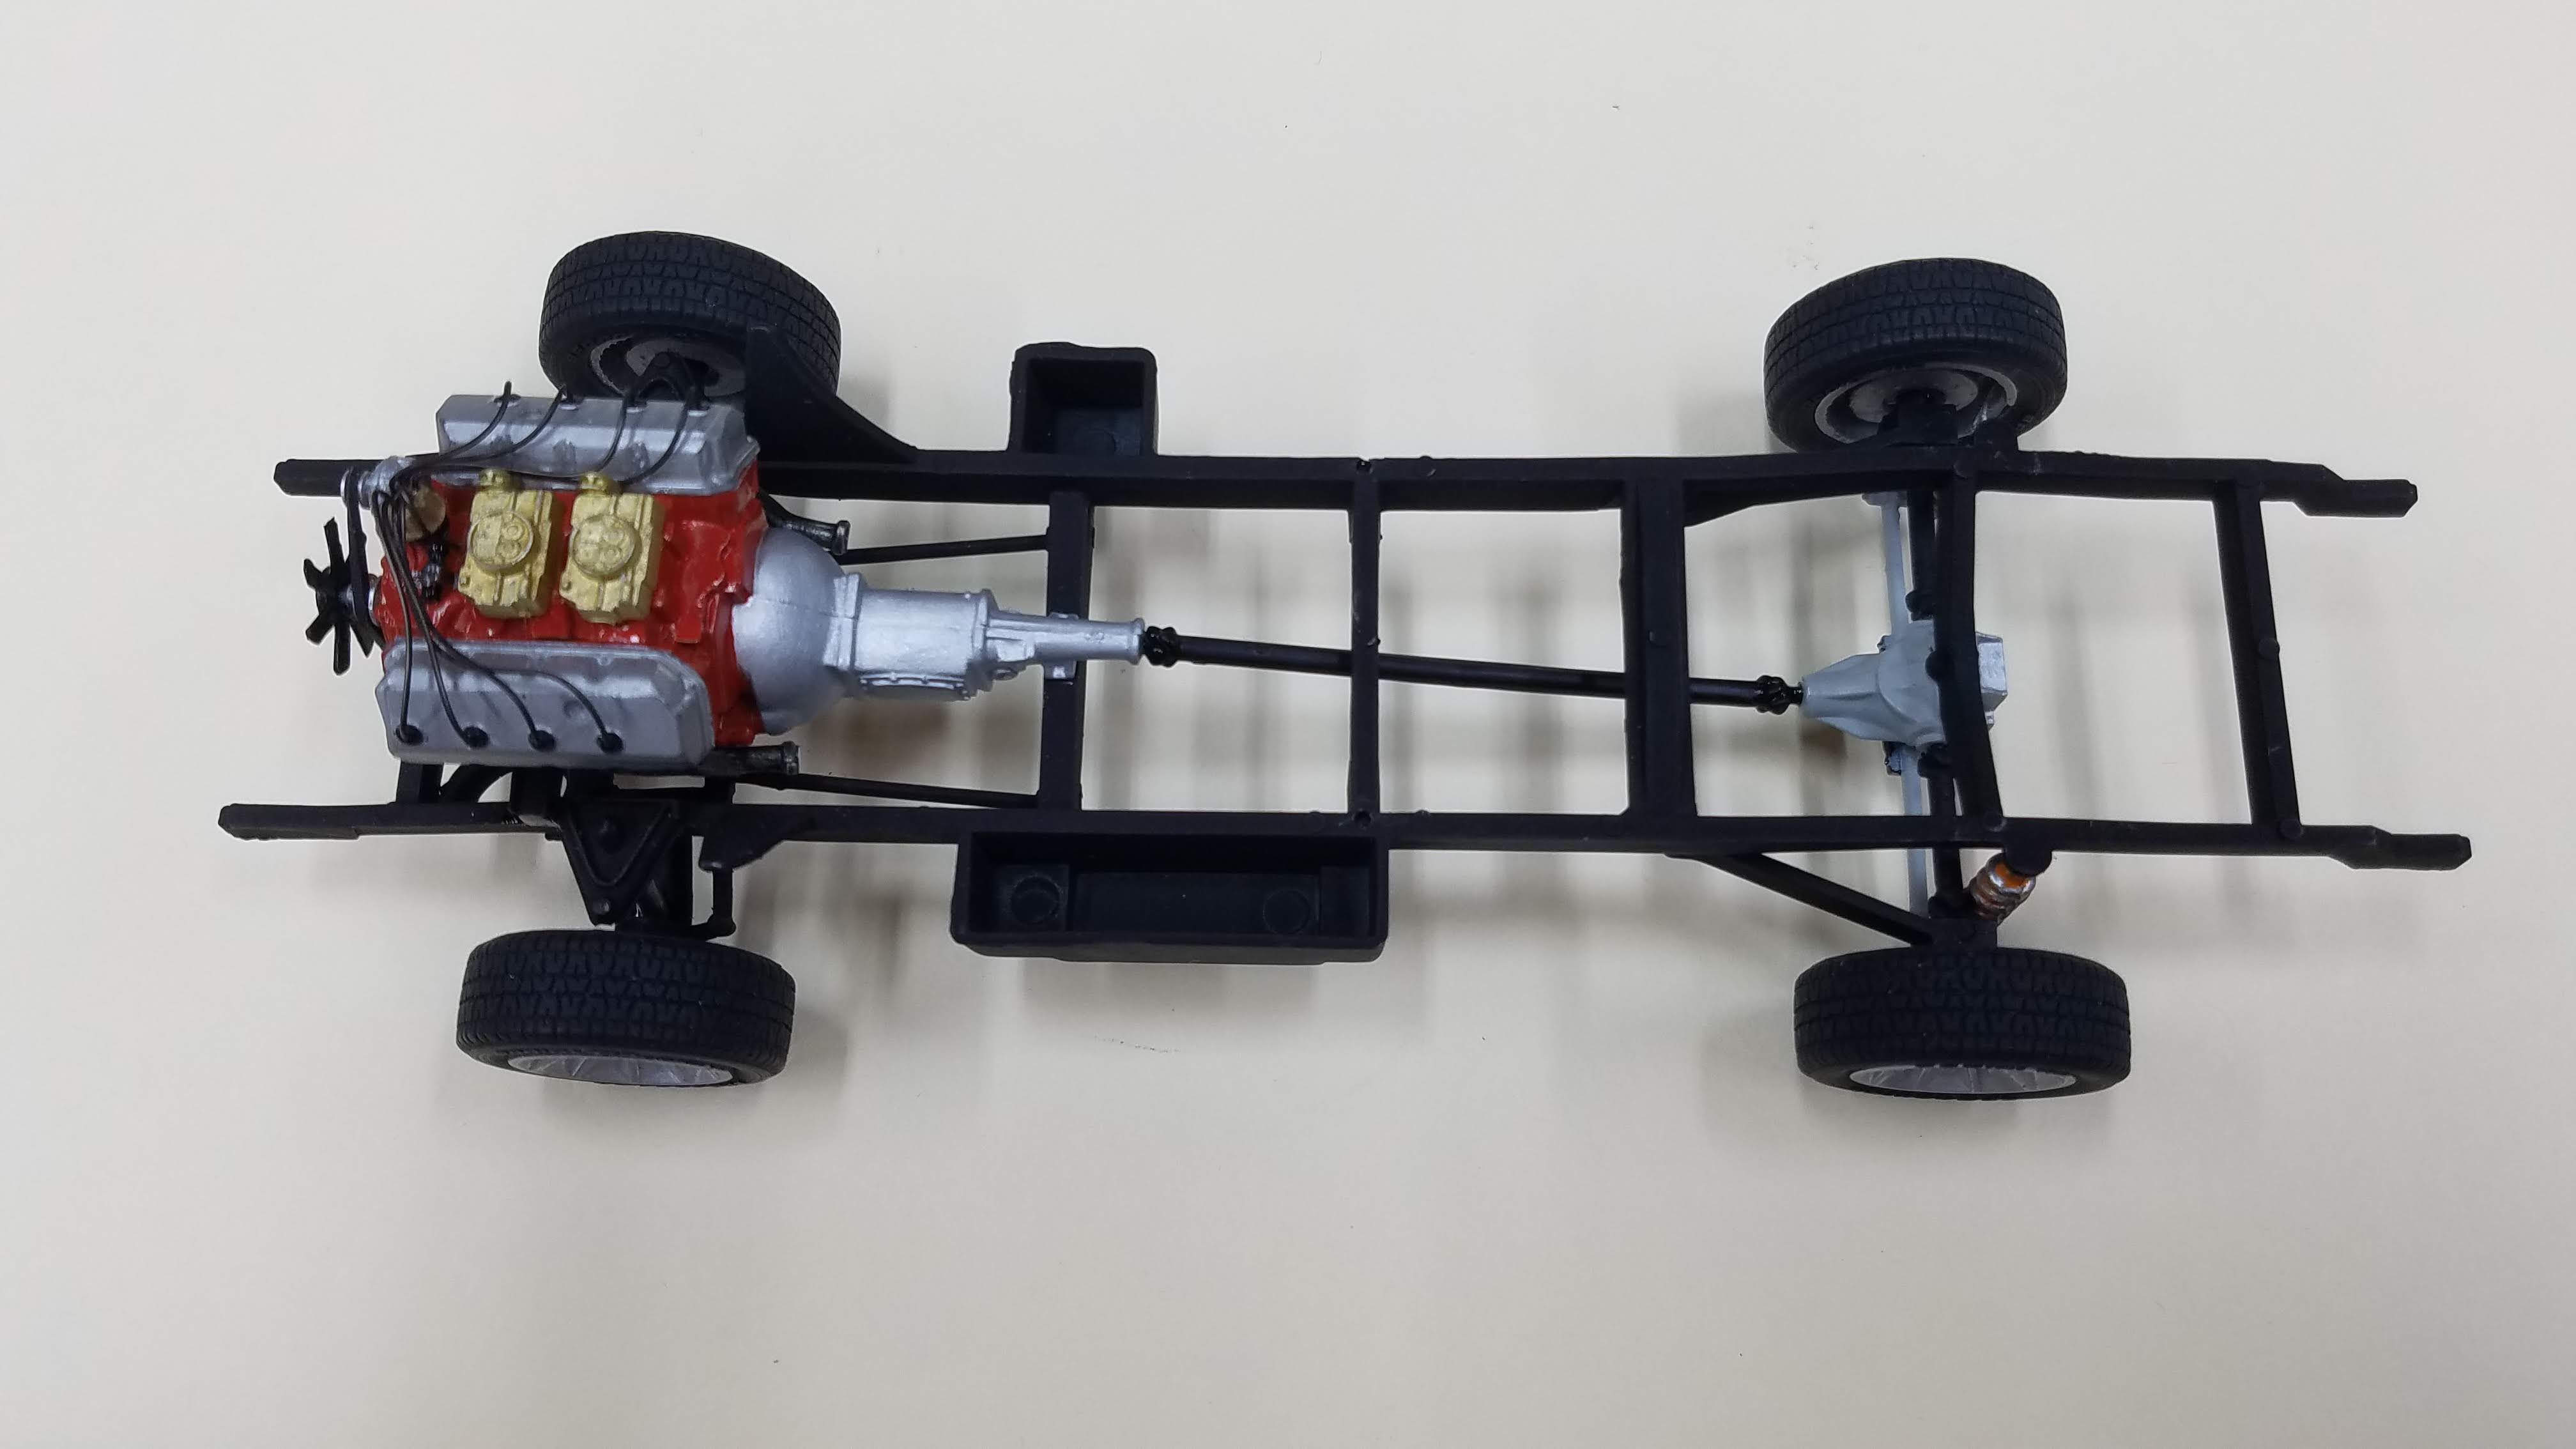 Top view of the chassis with the wheels and tires installed